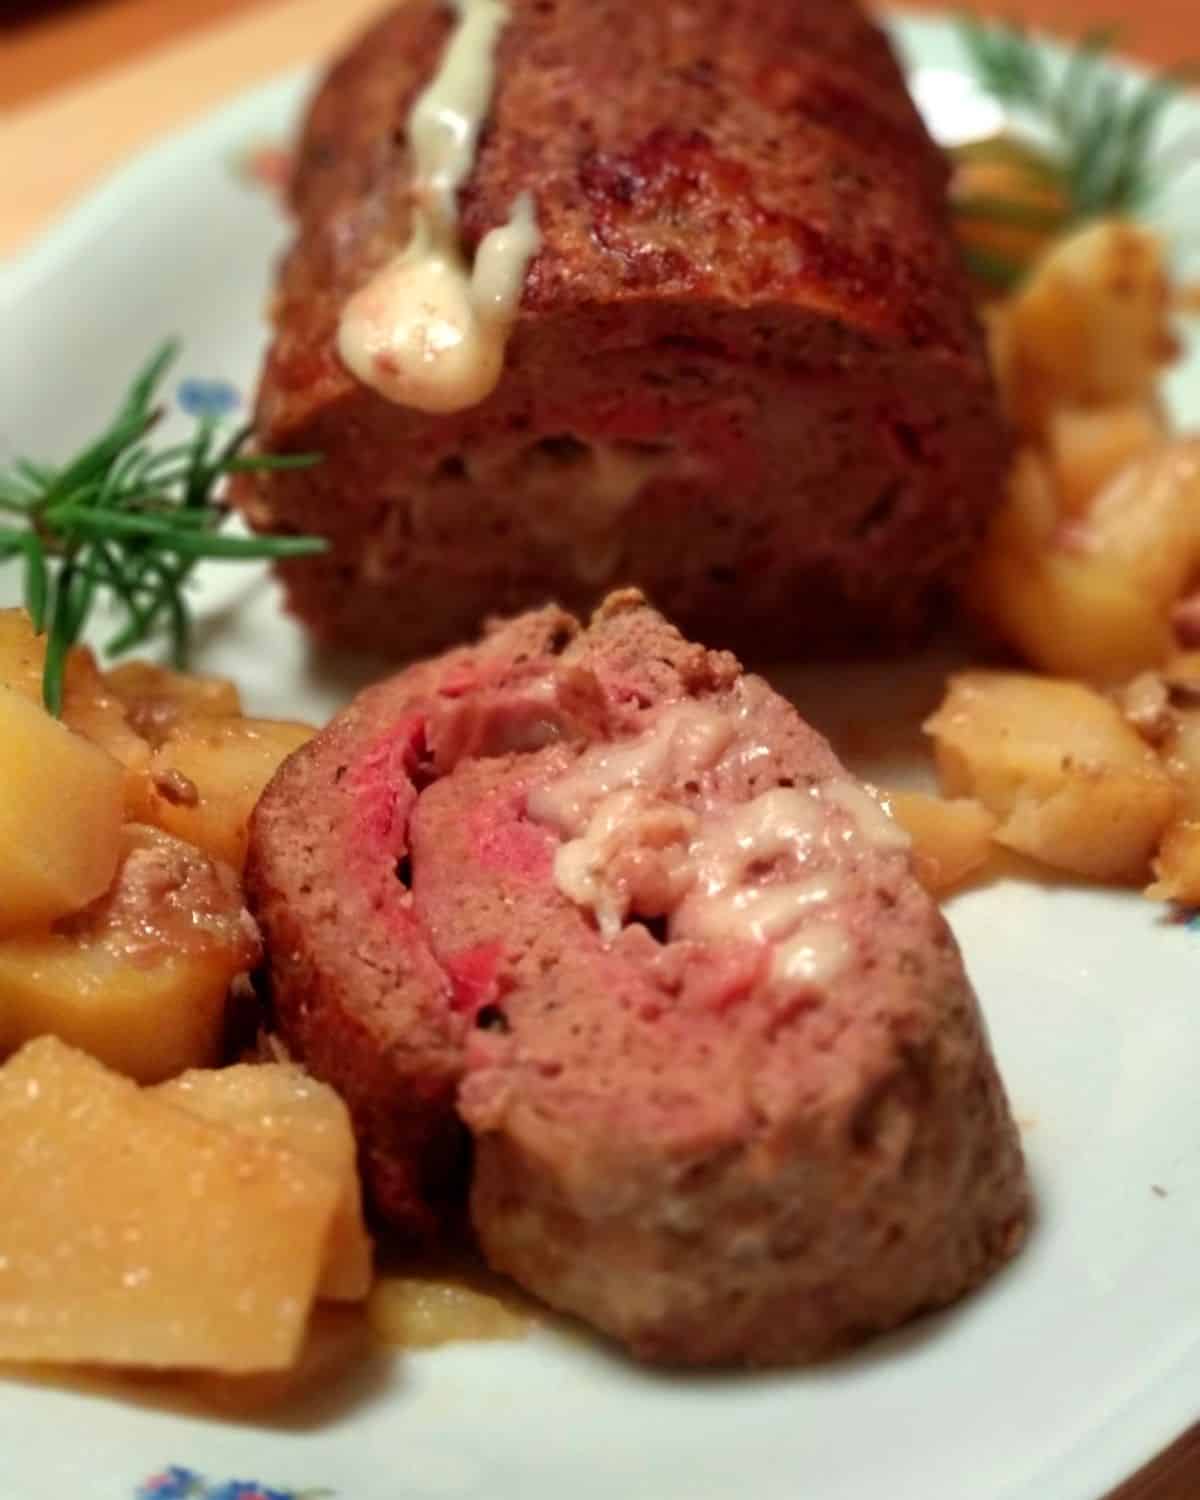 A Meat Loaf with Prosciutto on a white plate. It-is-sliced-showing-the -prosciutto and cheese layers inside. There are some roasted potato aside